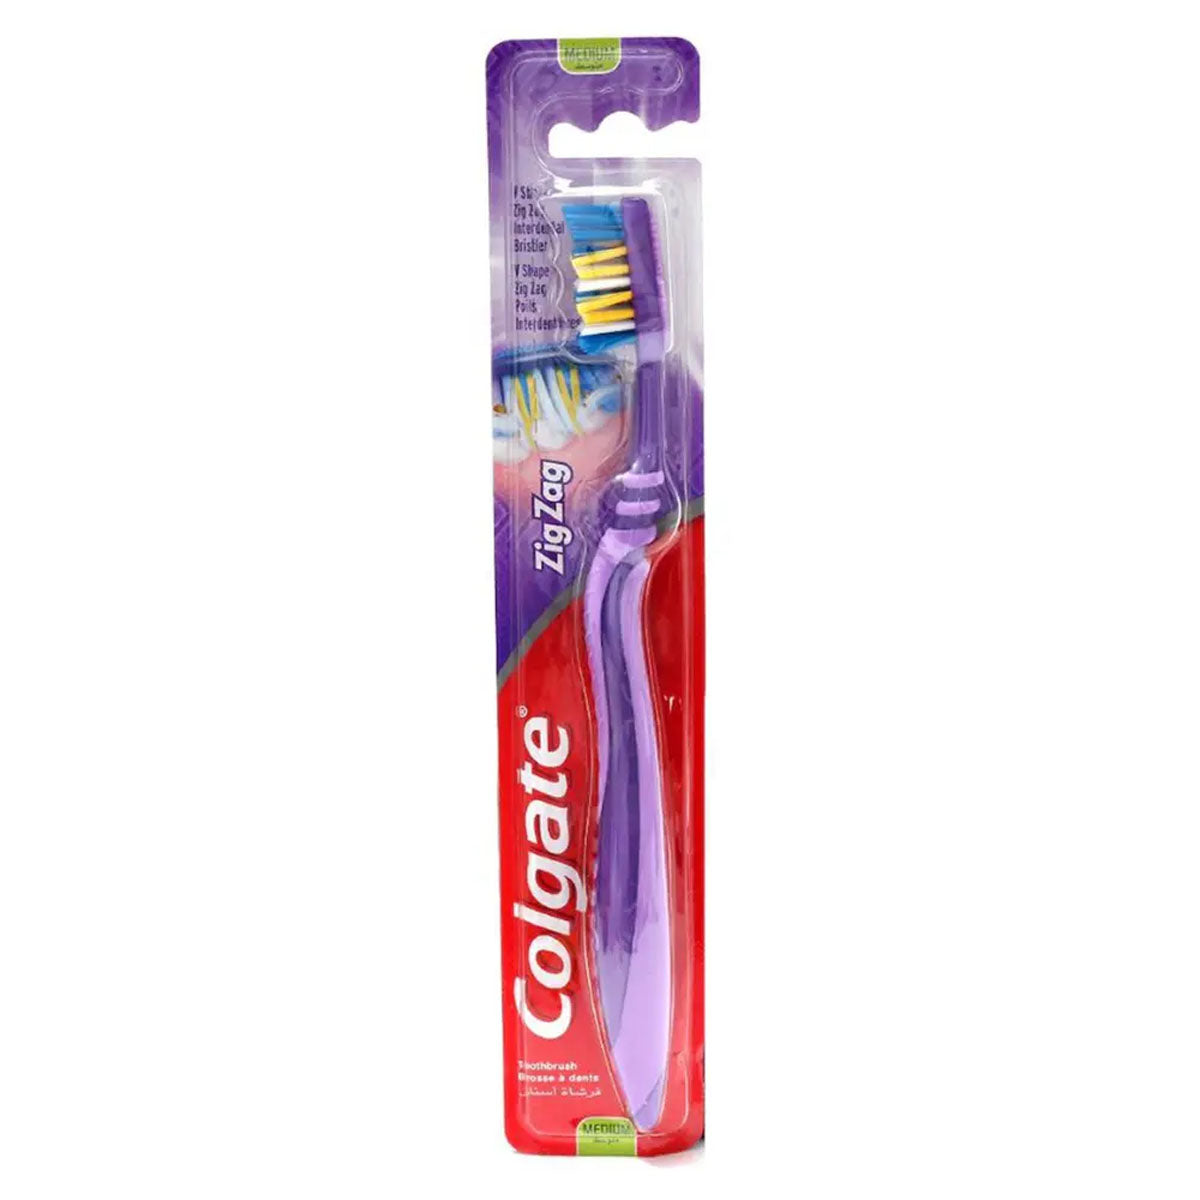 Colgate - Zig Zag Toothbrush - Continental Food Store